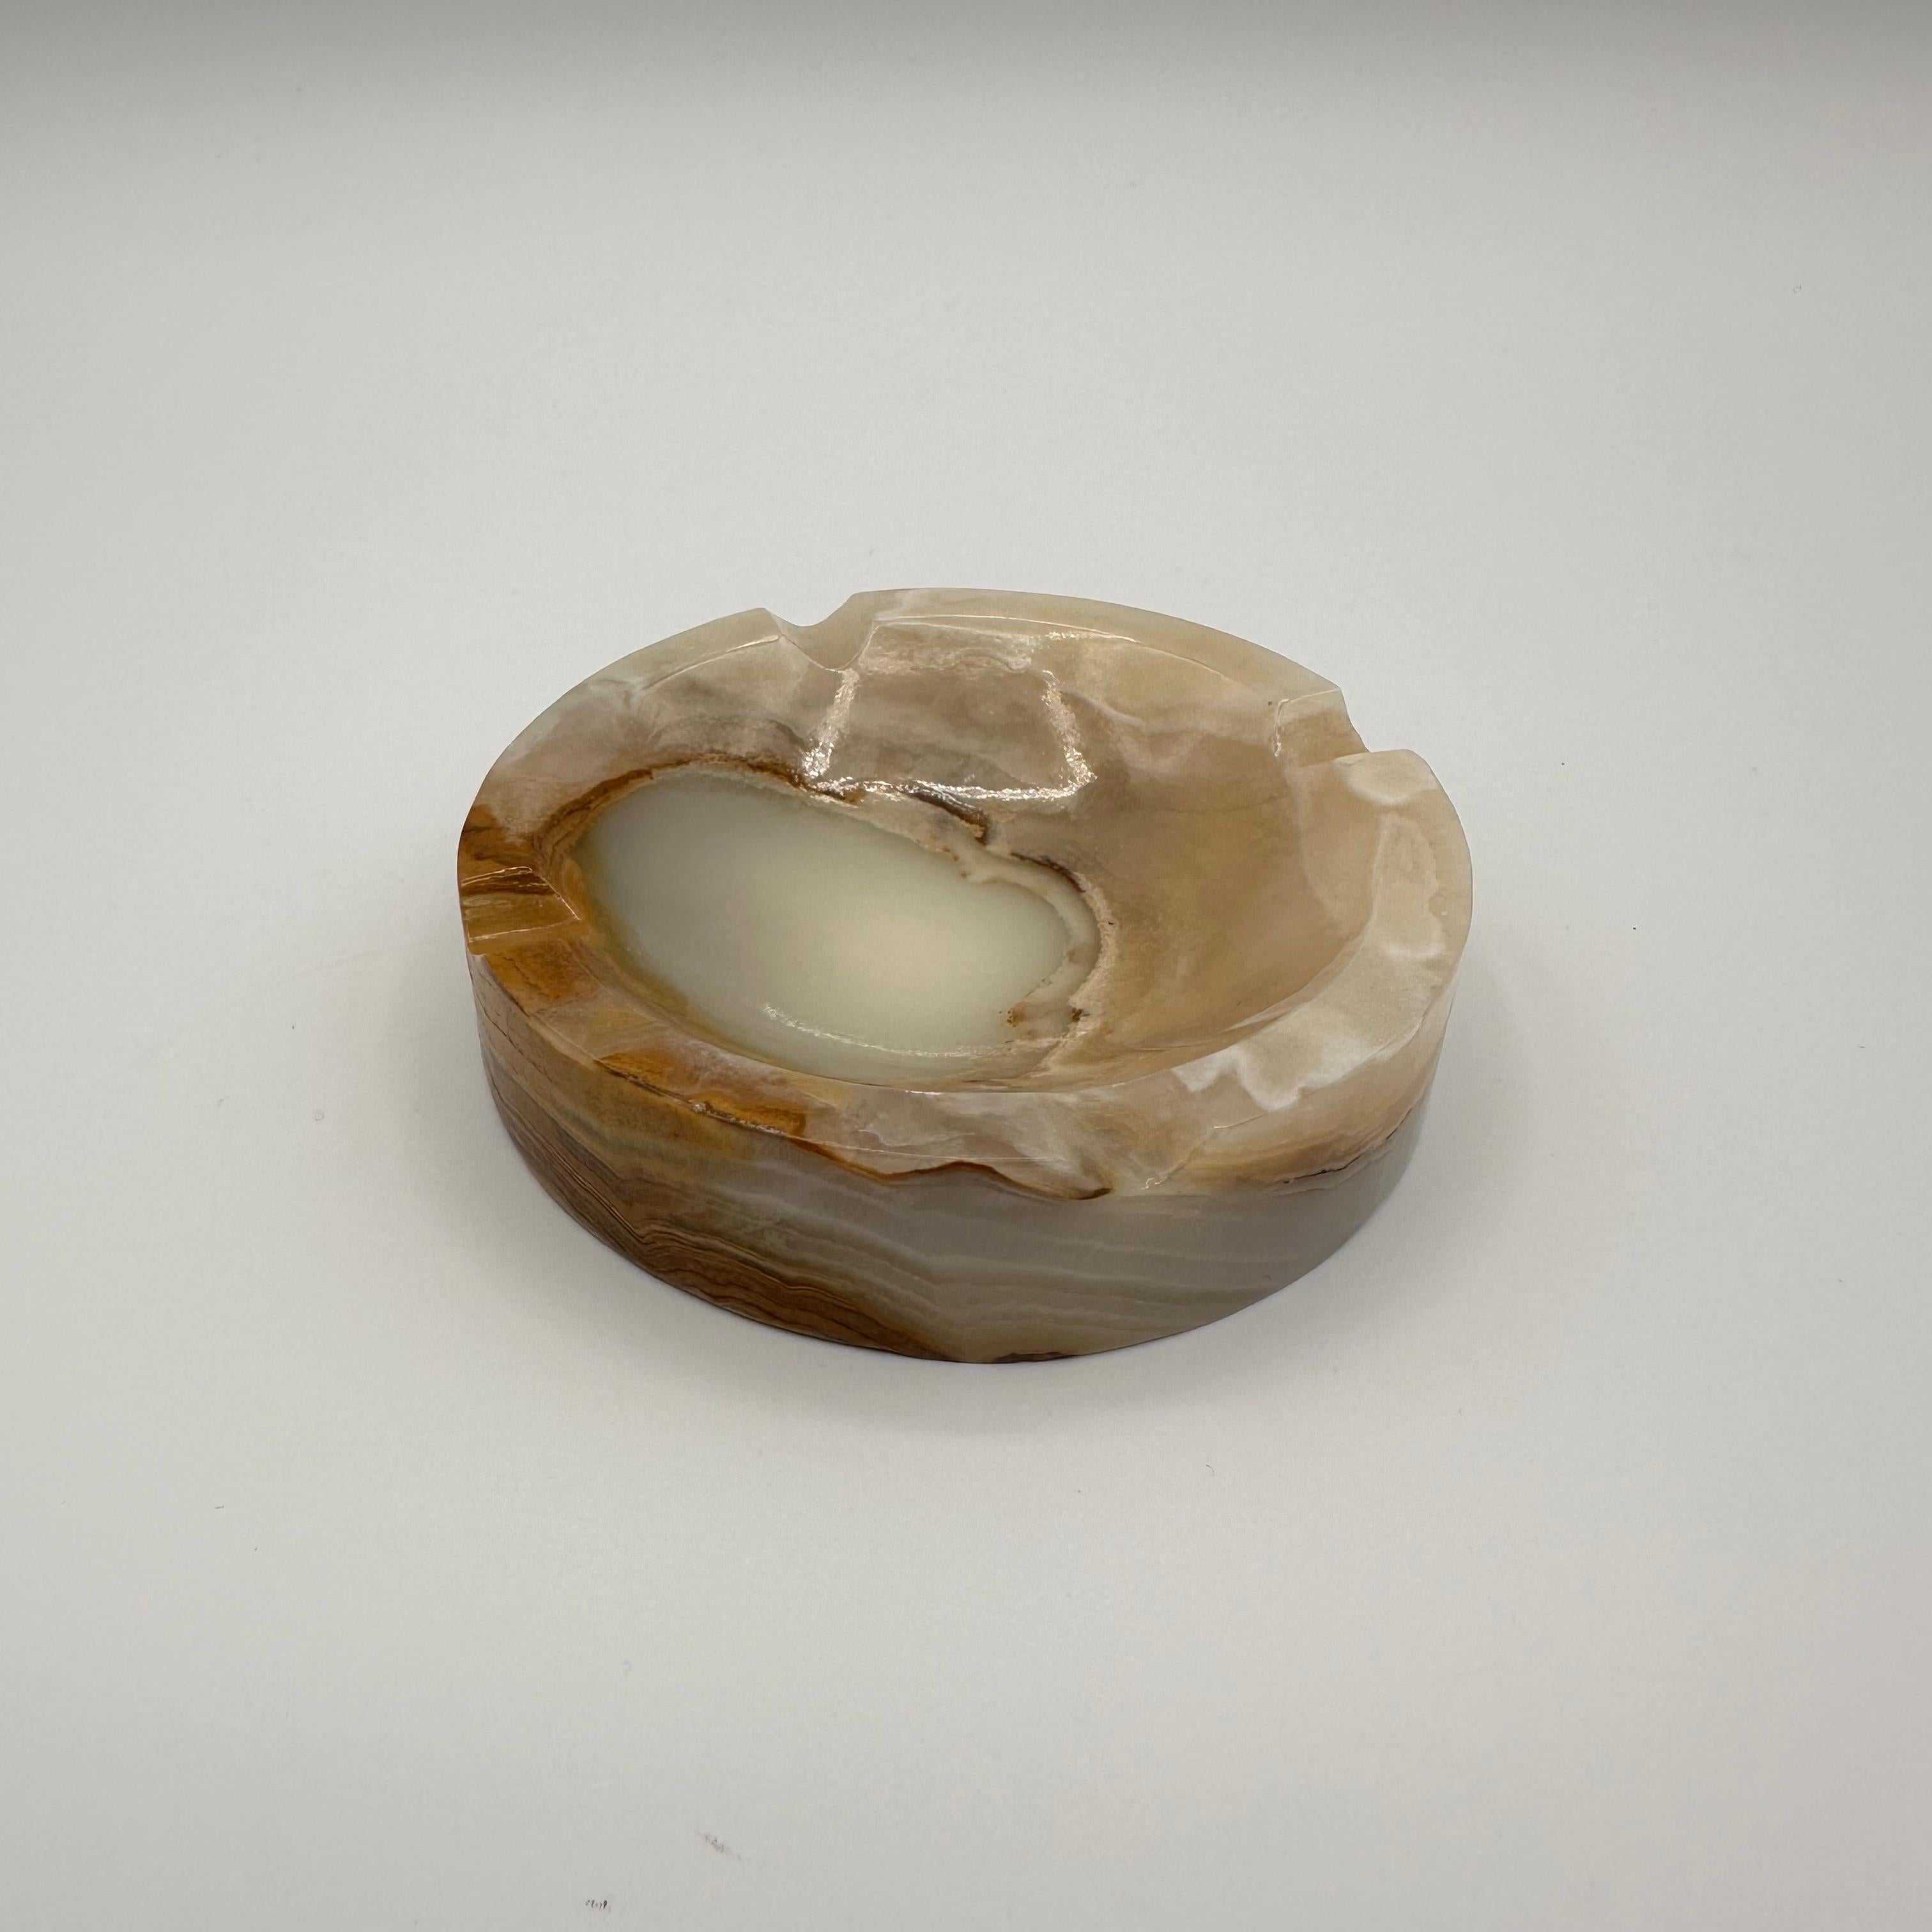 Vintage mid century modern small round ashtray made from a beautifully layered and striated piece of onyx stone in shades of brown, tan and beige. An amazing piece of stone that shows the natural process of the sediment banding and forming over